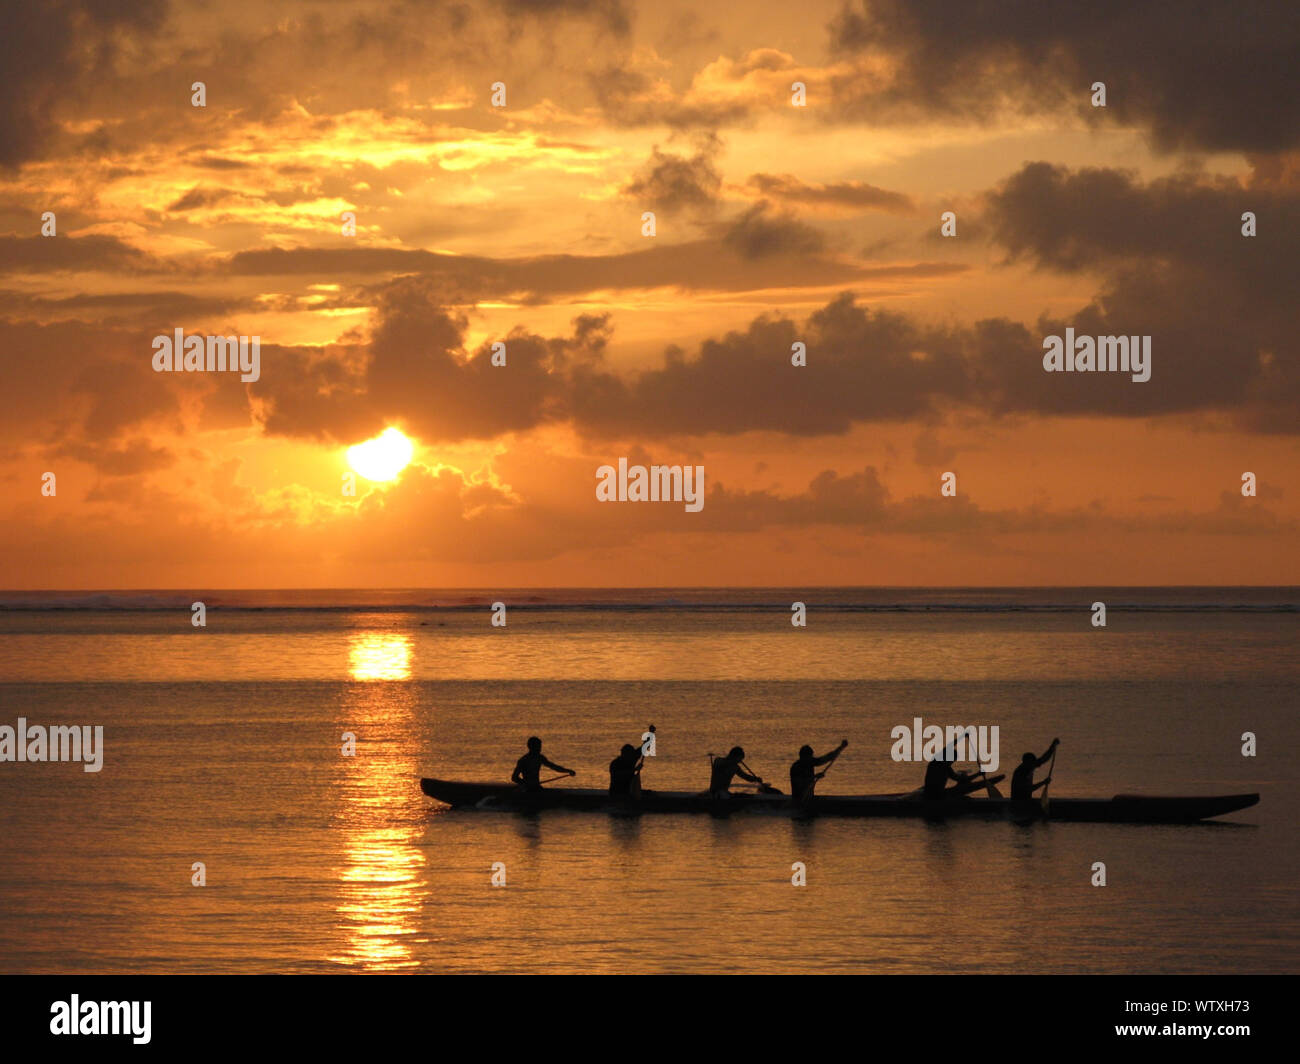 Silhouettes Of Six People On Canoe At Sunset Stock Photo